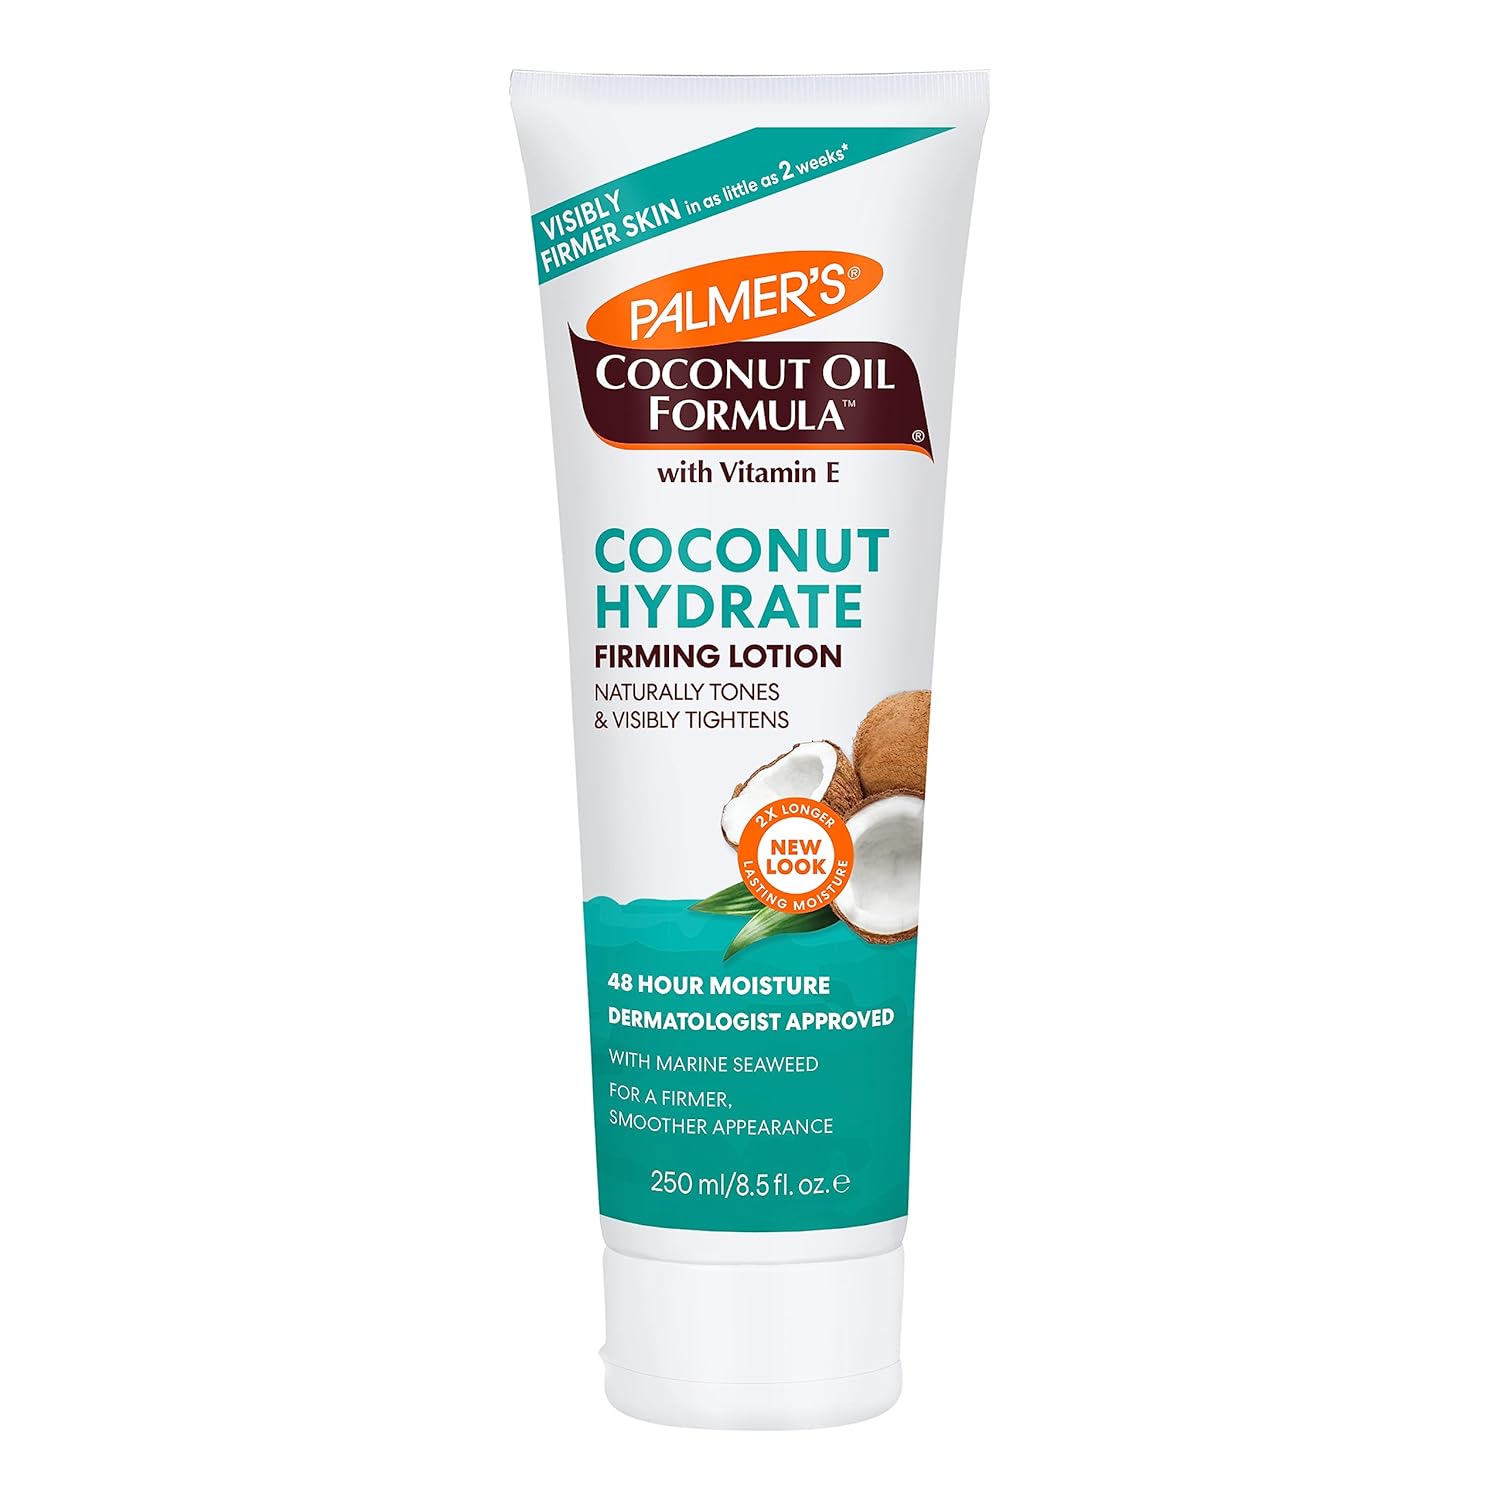 Palmer's Coconut Oil Formula Hydrating & Firming Body Lotion, Skin Firming & Tightening Lotion for a Firmer and Smoother Appearance, 8.5 fl. oz